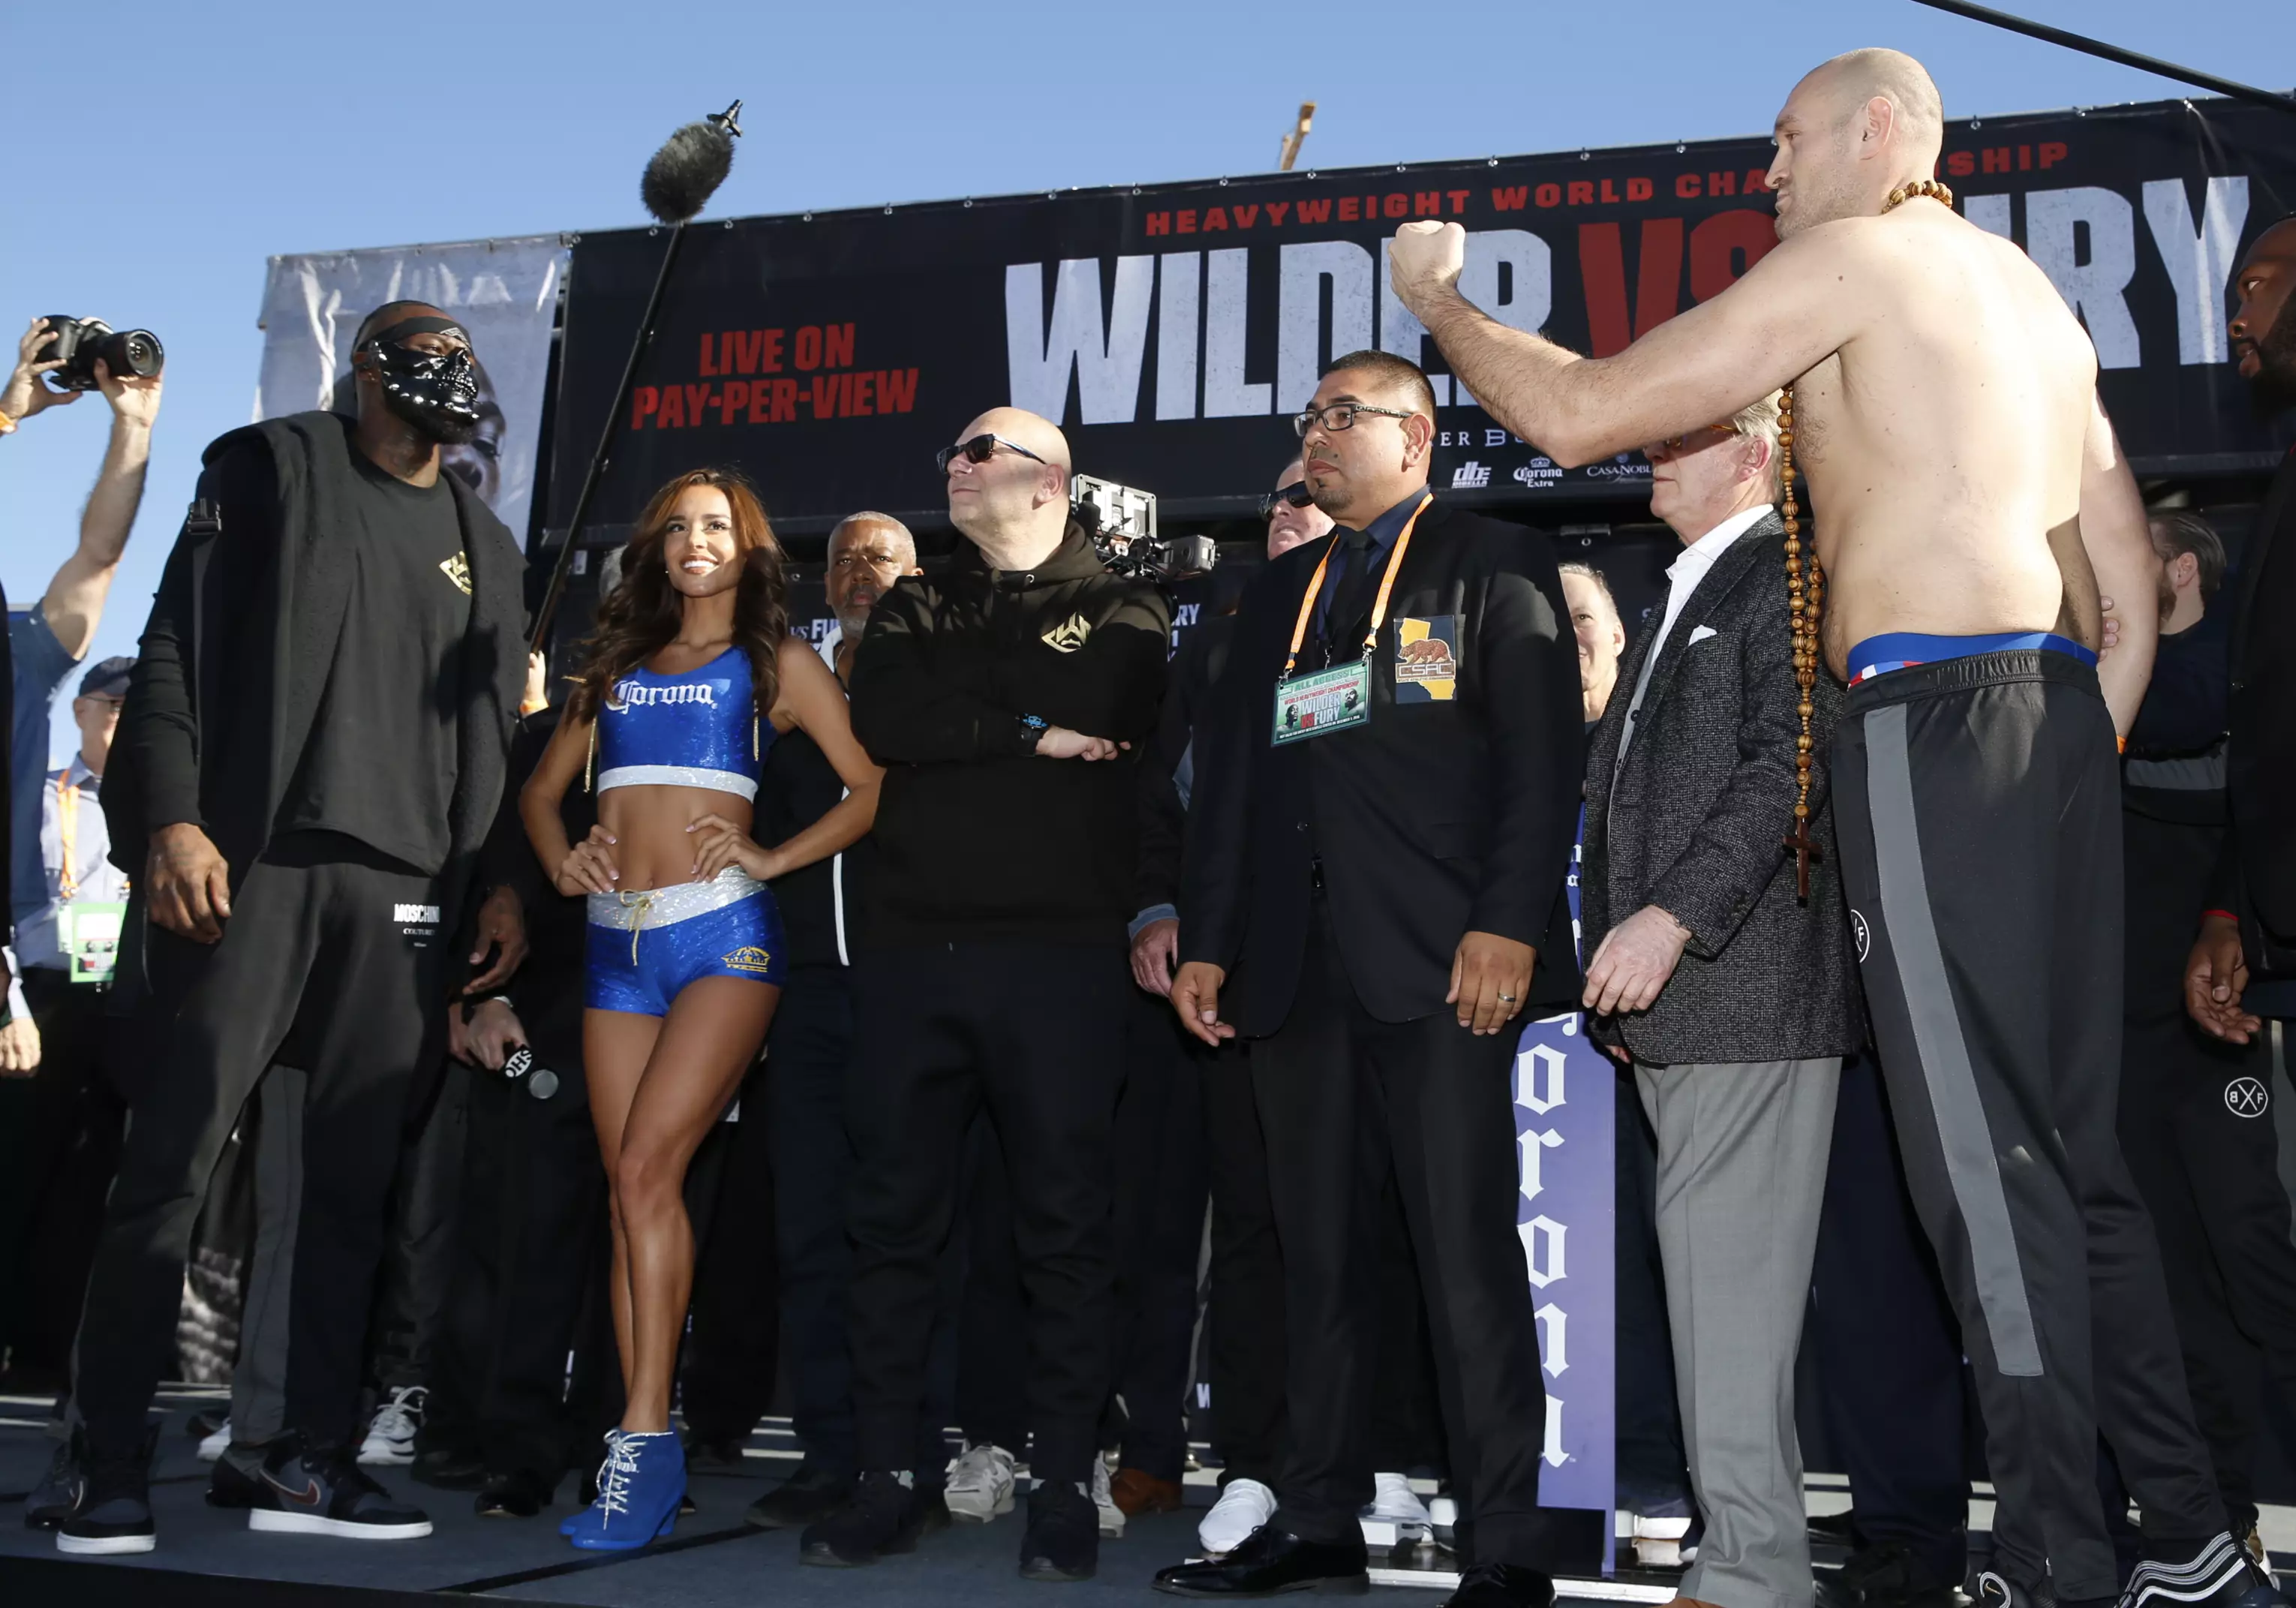 Wilder and Fury were kept apart at the weigh in. Image: PA Images